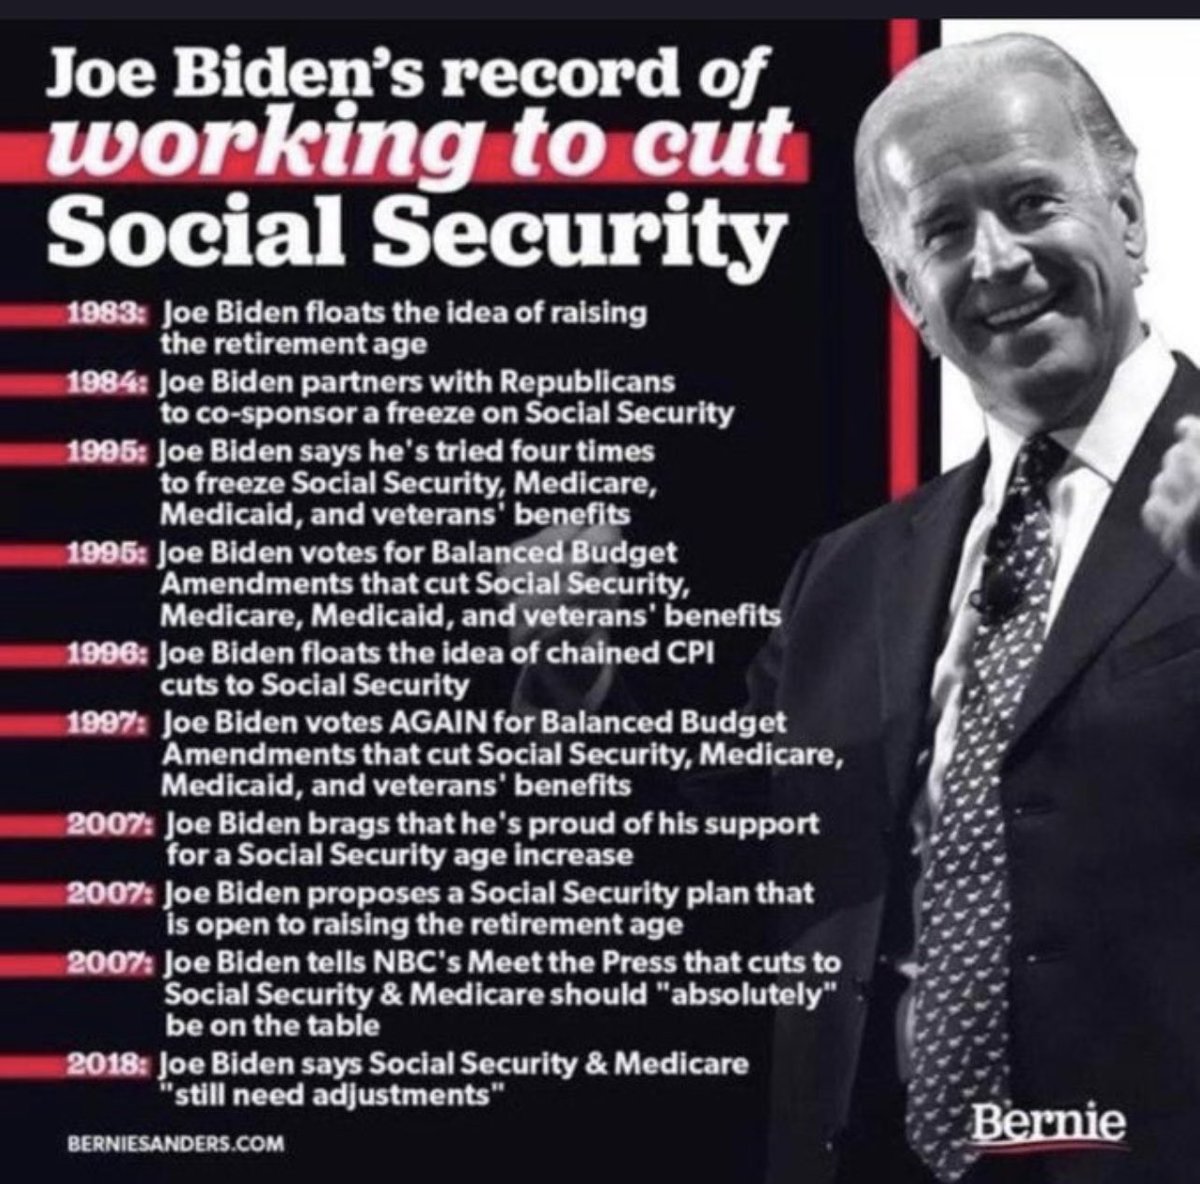 @ResisterSis20 Social security was gutted long ago..